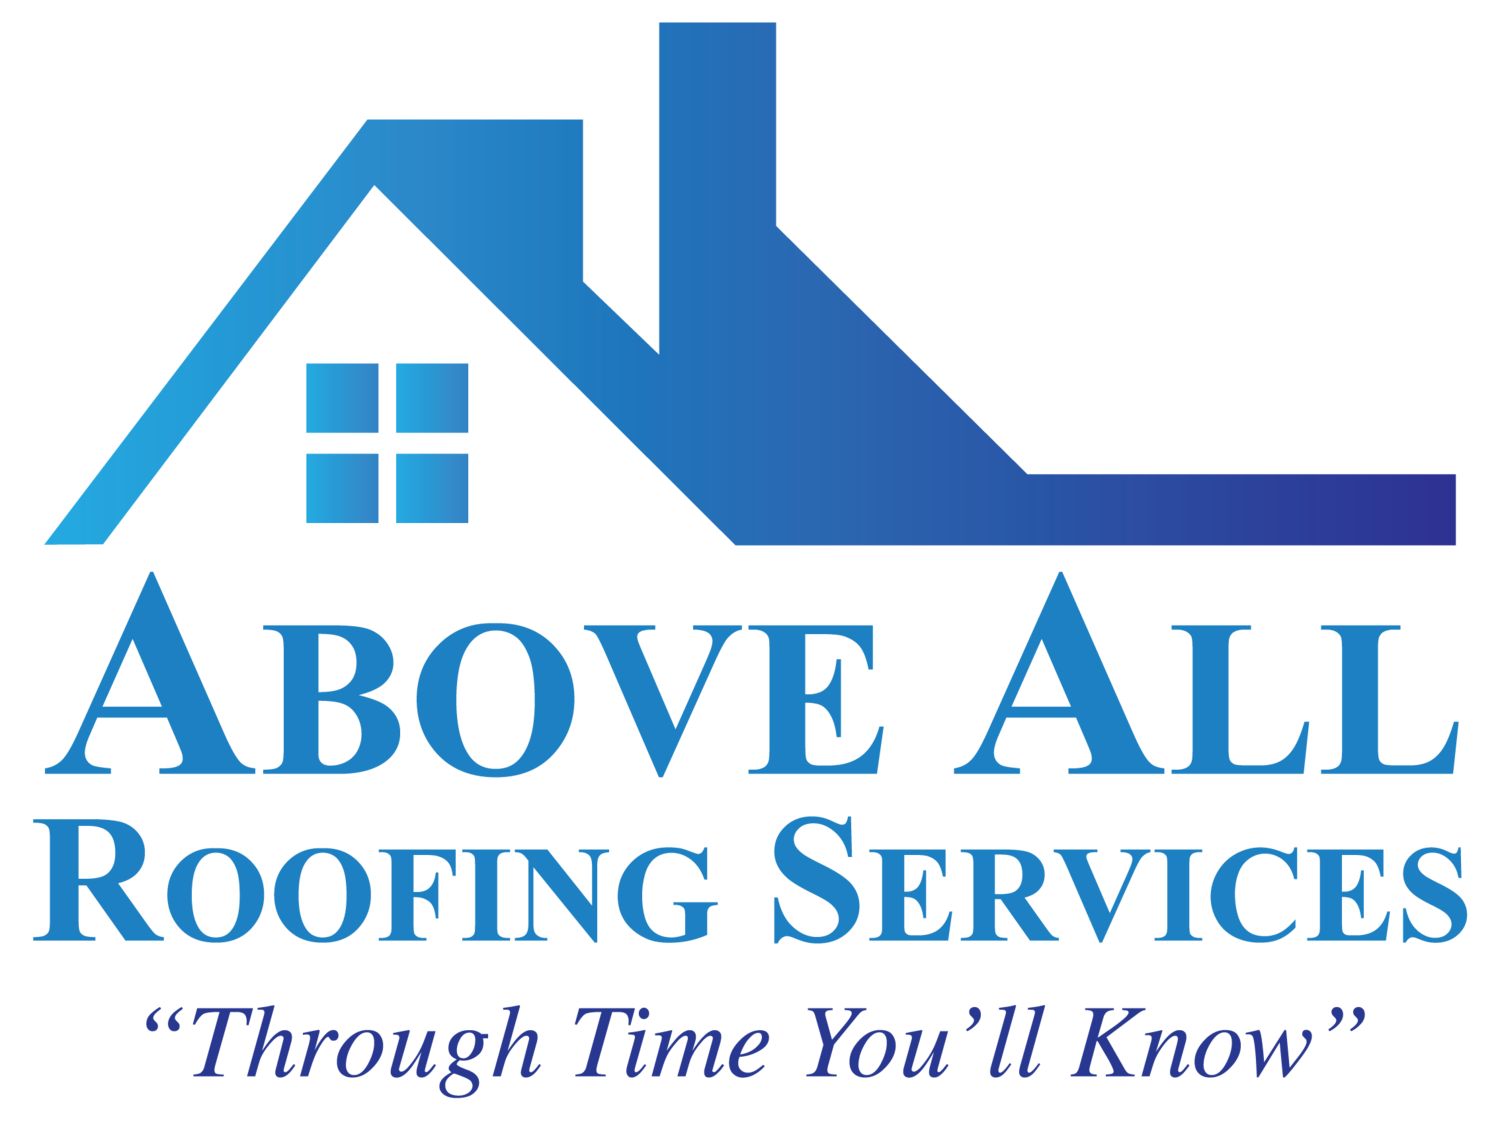 Above All Roofing Services